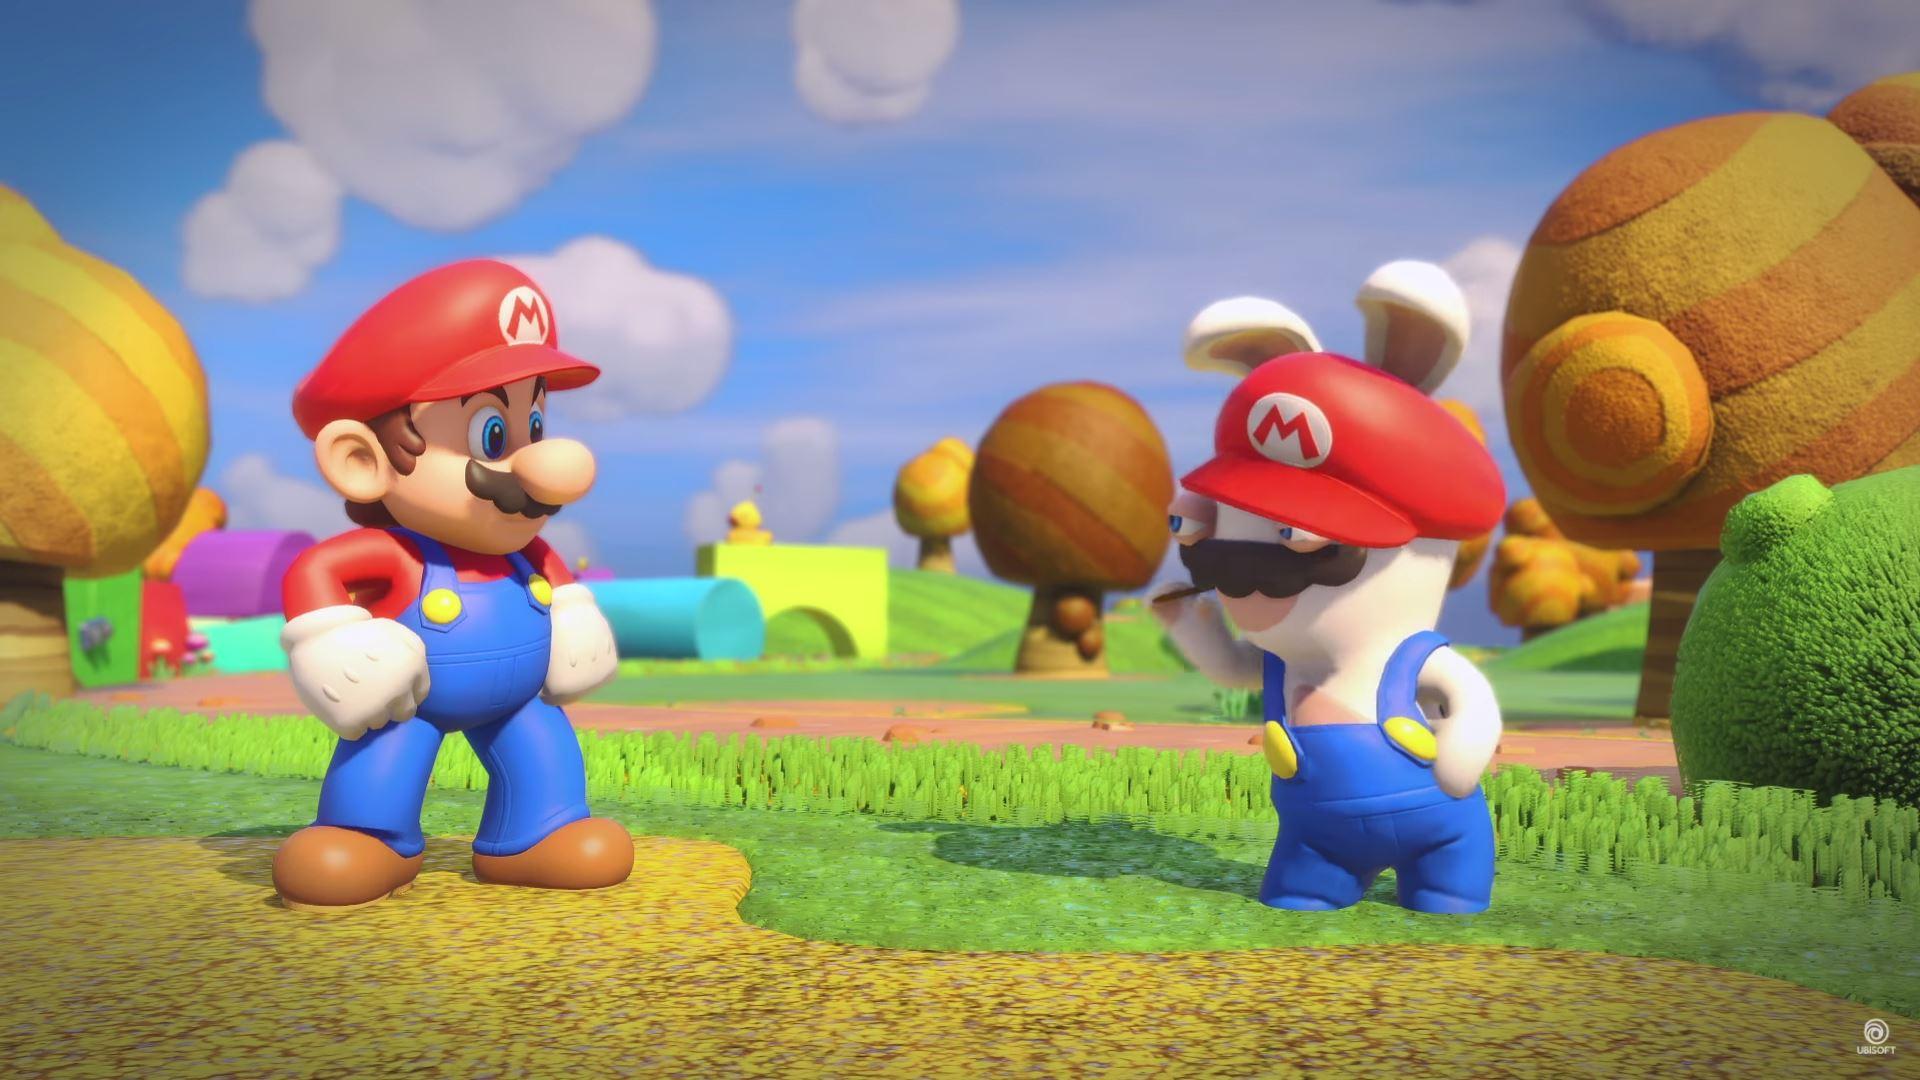 Mario + Rabbids Is The Switch's Best Selling Third Party Game